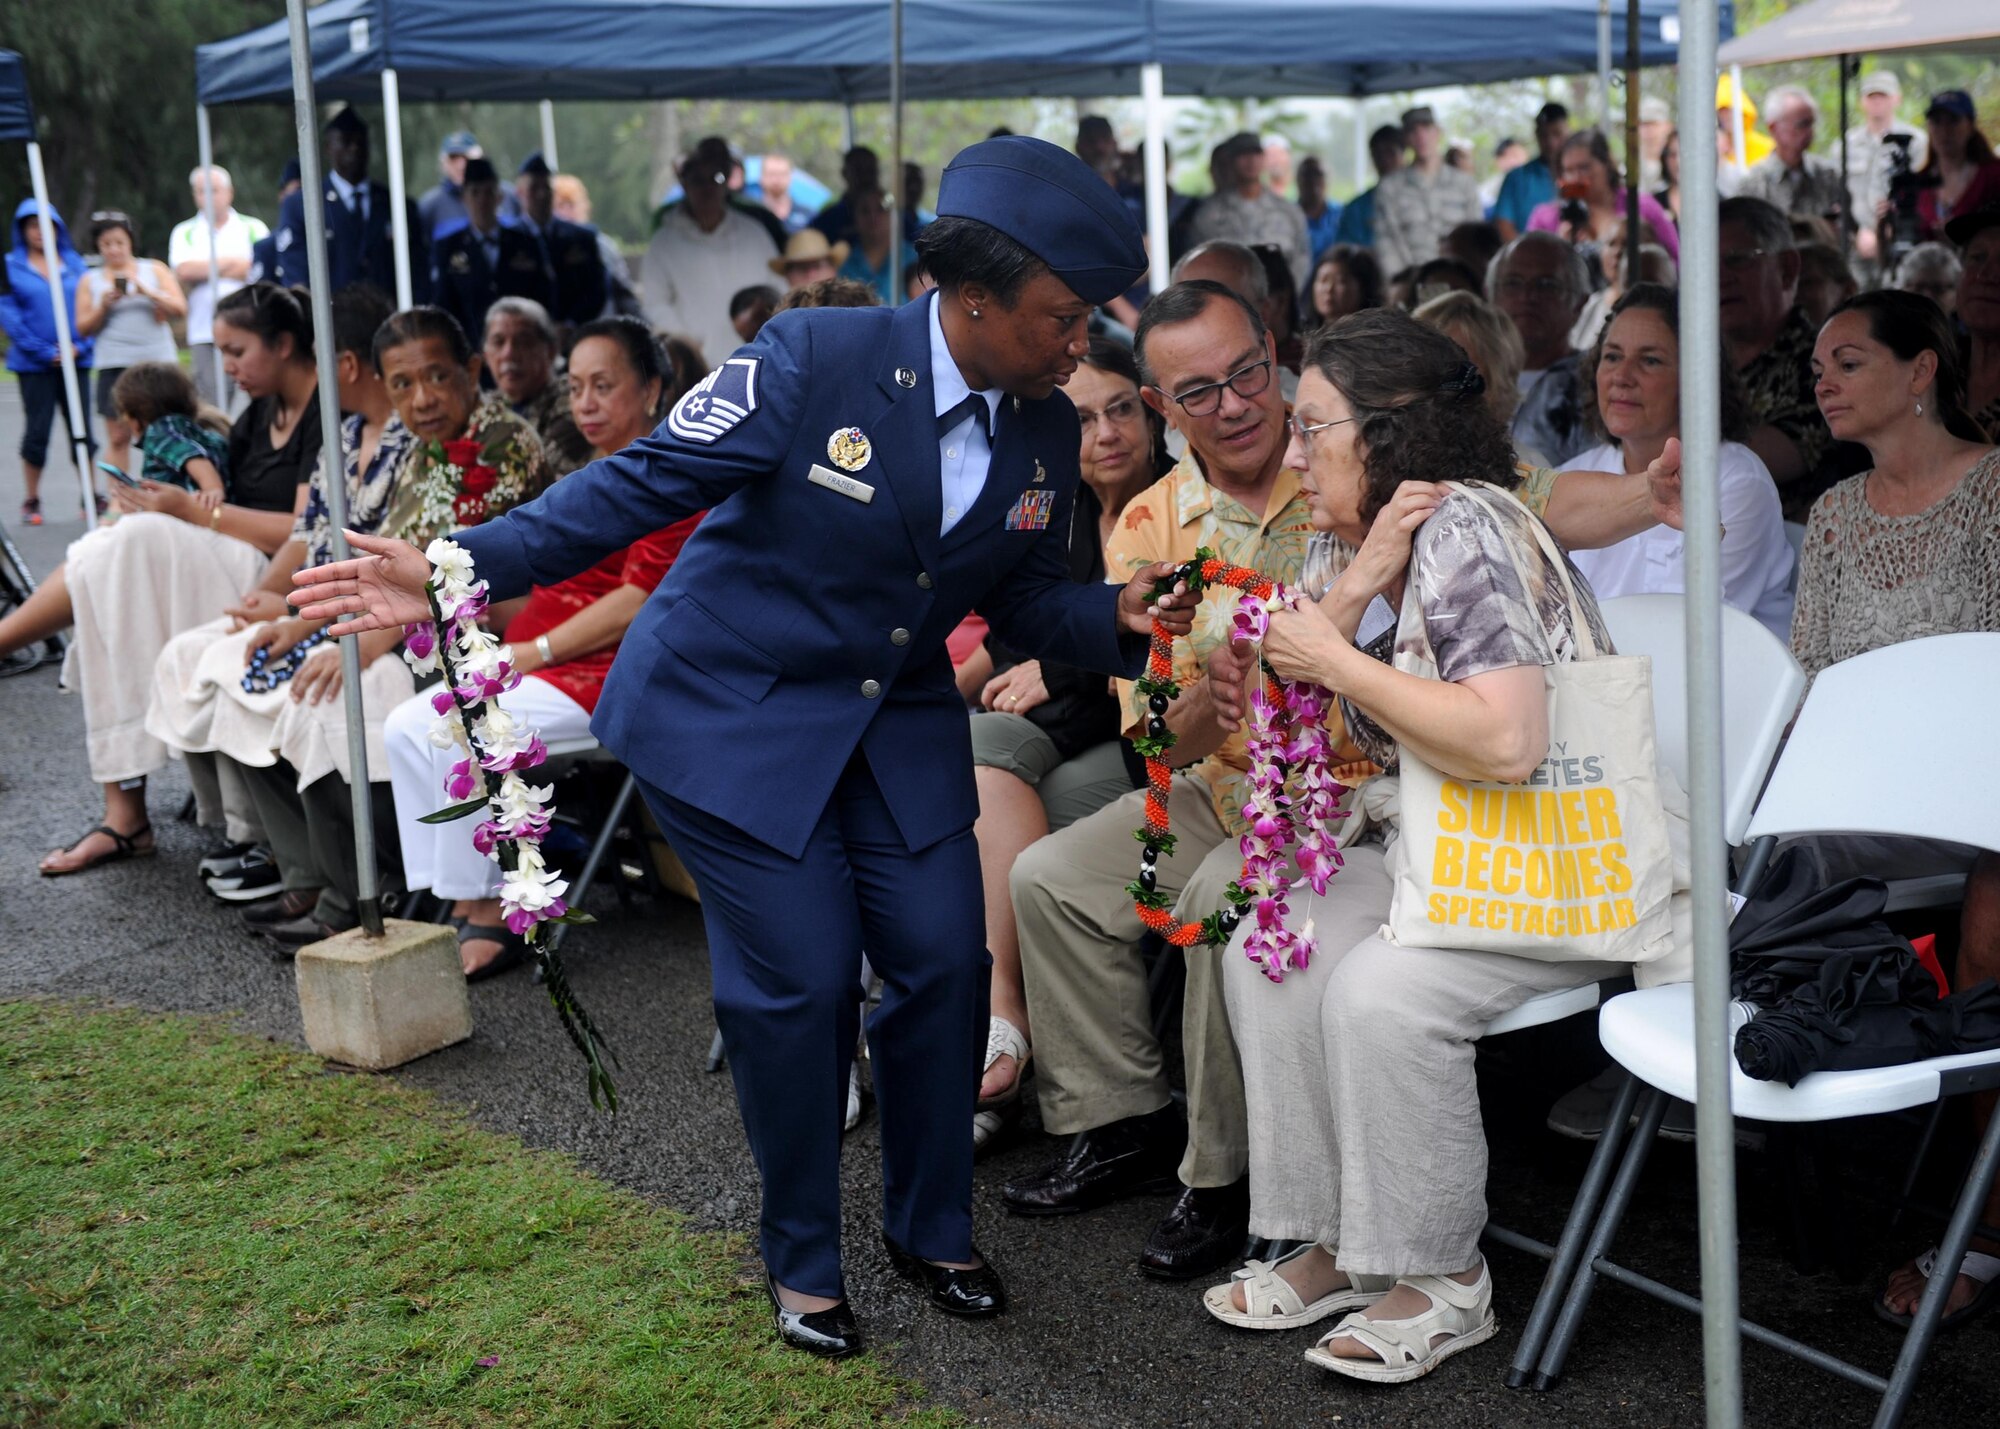 Master Sgt. Latersa Frazier, the superintendent of Pacific Air Forces protocol, assists family members of honored veterans as they present leis on a memorial during a commemoration ceremony at Bellows Air Force Station, Hawaii, Dec. 8th, 2016. Approximately 100 people, including family members of several honored veterans, came together in recognizing the bravery displayed at Bellows during the Dec. 7th attack on Pearl Harbor and Oahu. (U.S. Air Force photo by Staff Sgt. Alexander Martinez)